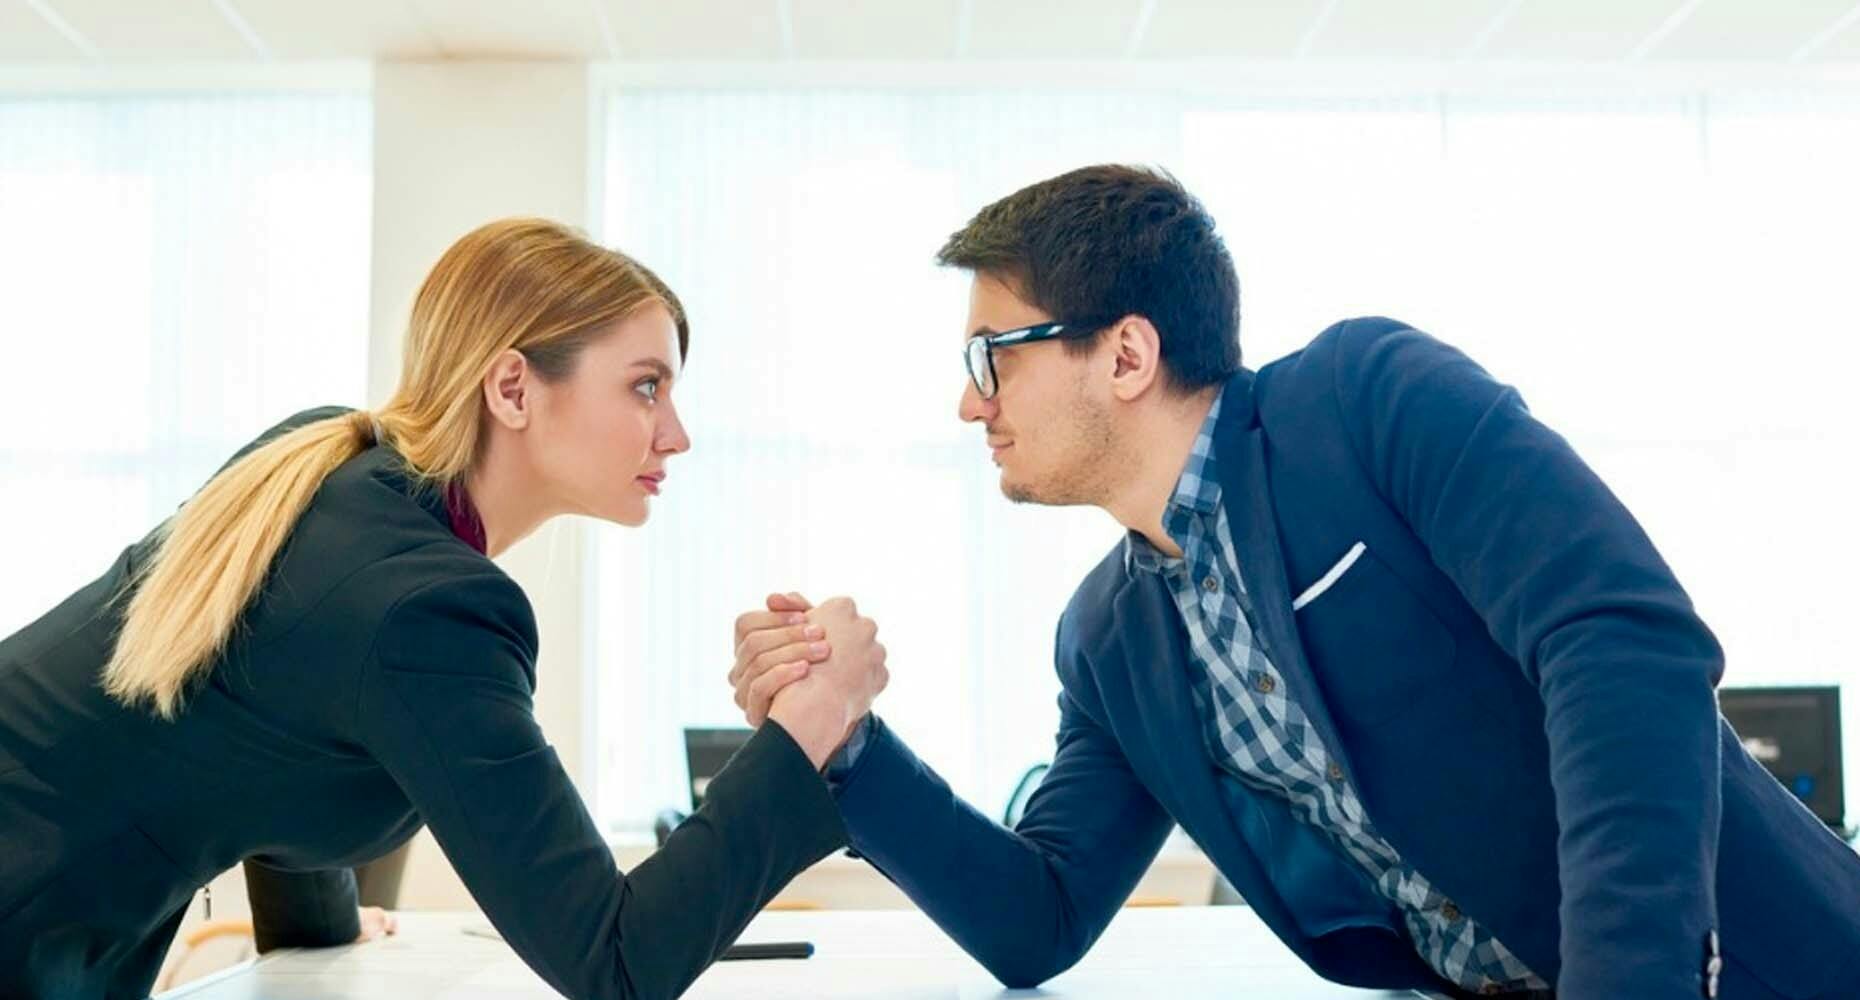 sales people arm wrestling in an office